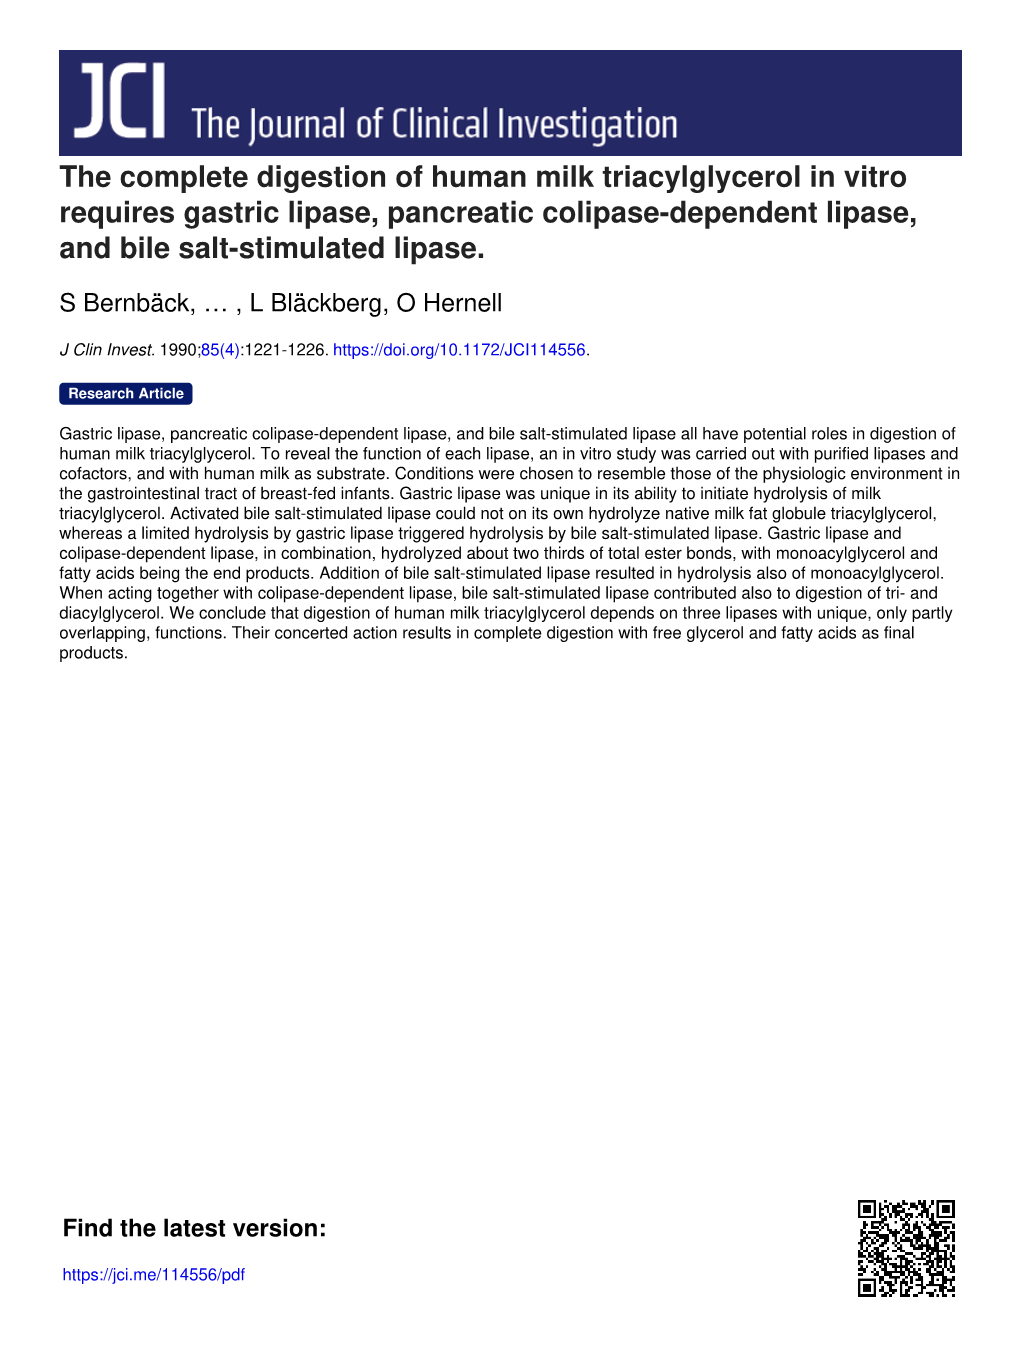 The Complete Digestion of Human Milk Triacylglycerol in Vitro Requires Gastric Lipase, Pancreatic Colipase-Dependent Lipase, and Bile Salt-Stimulated Lipase